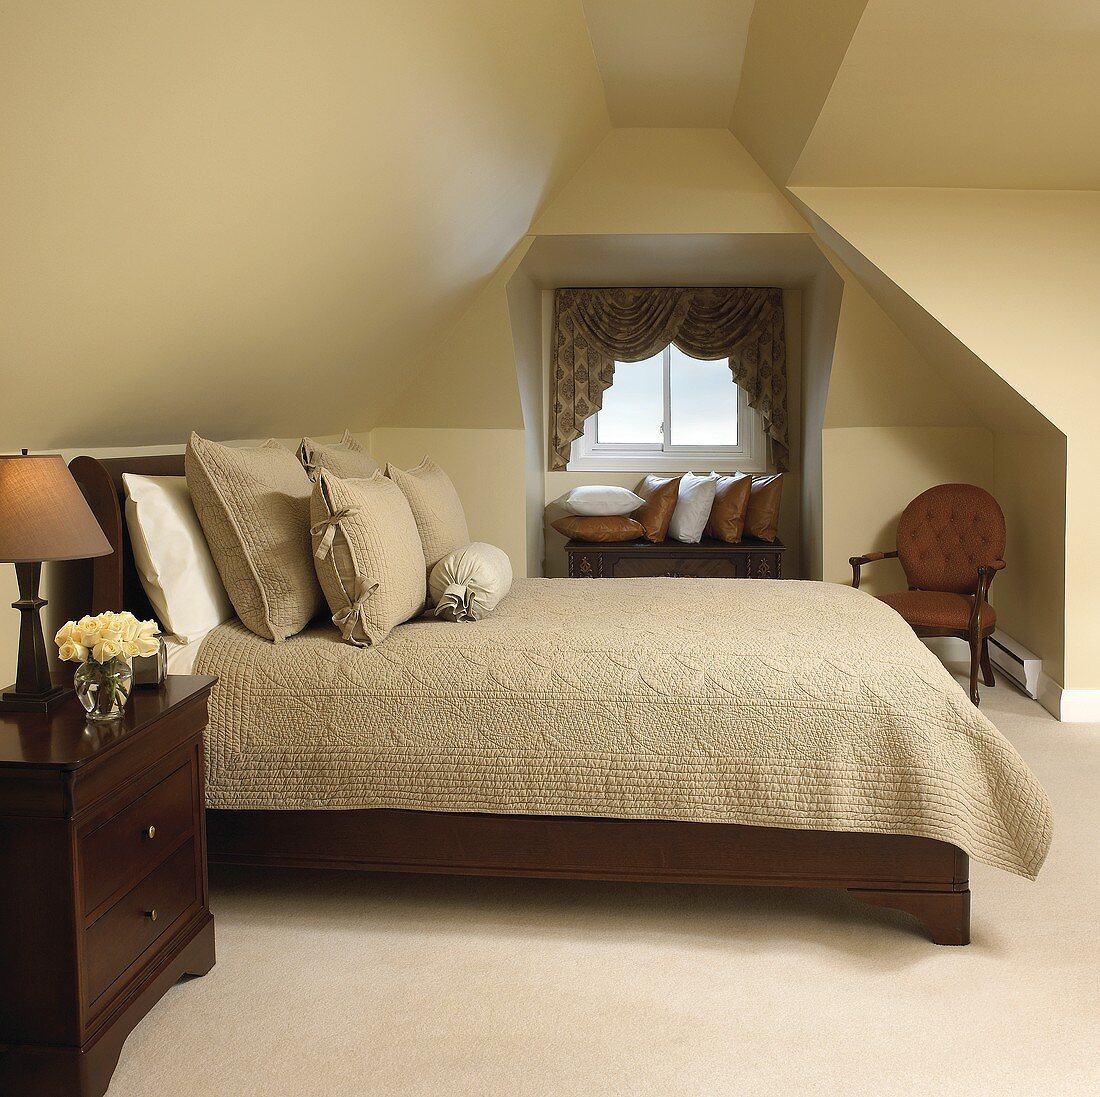 Bedroom in taupe